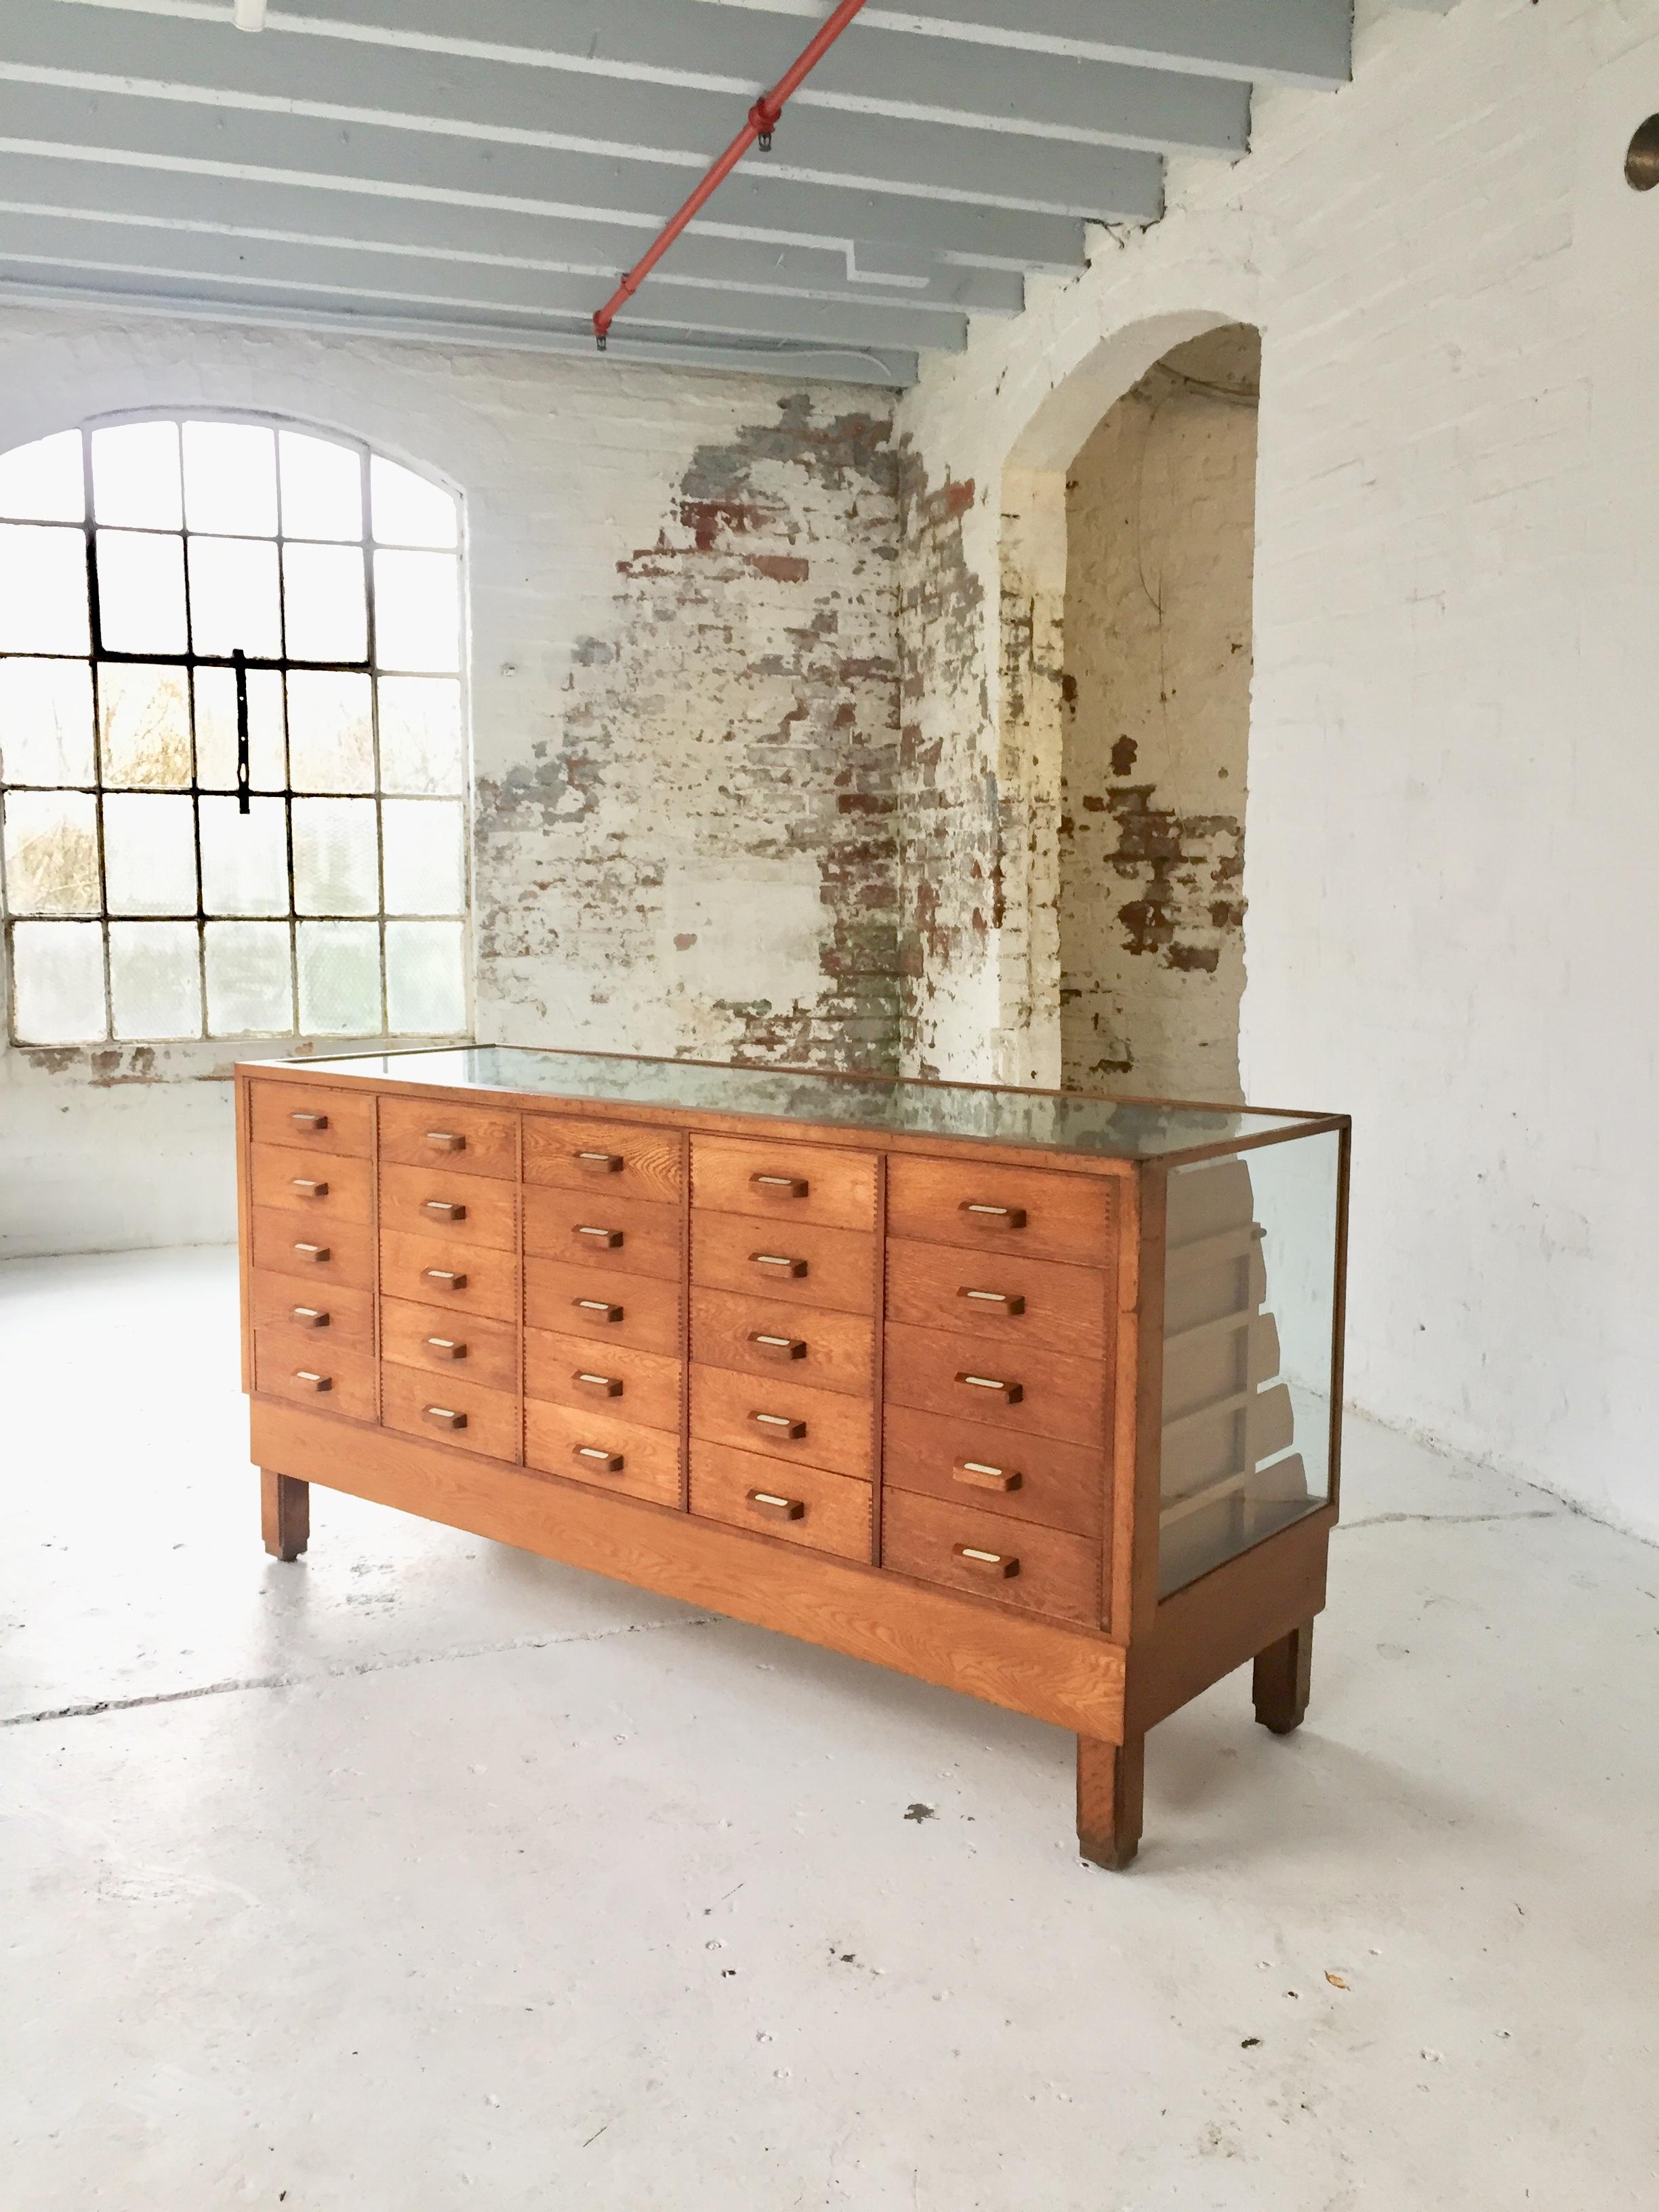 This is an original 1950s shop haberdashery counter made in Birmingham England by Harris and Sheldon Ltd. The large oak haberdashery counter has glass top, sides and front with oak beading around the edges. There are five banks of drawers with five